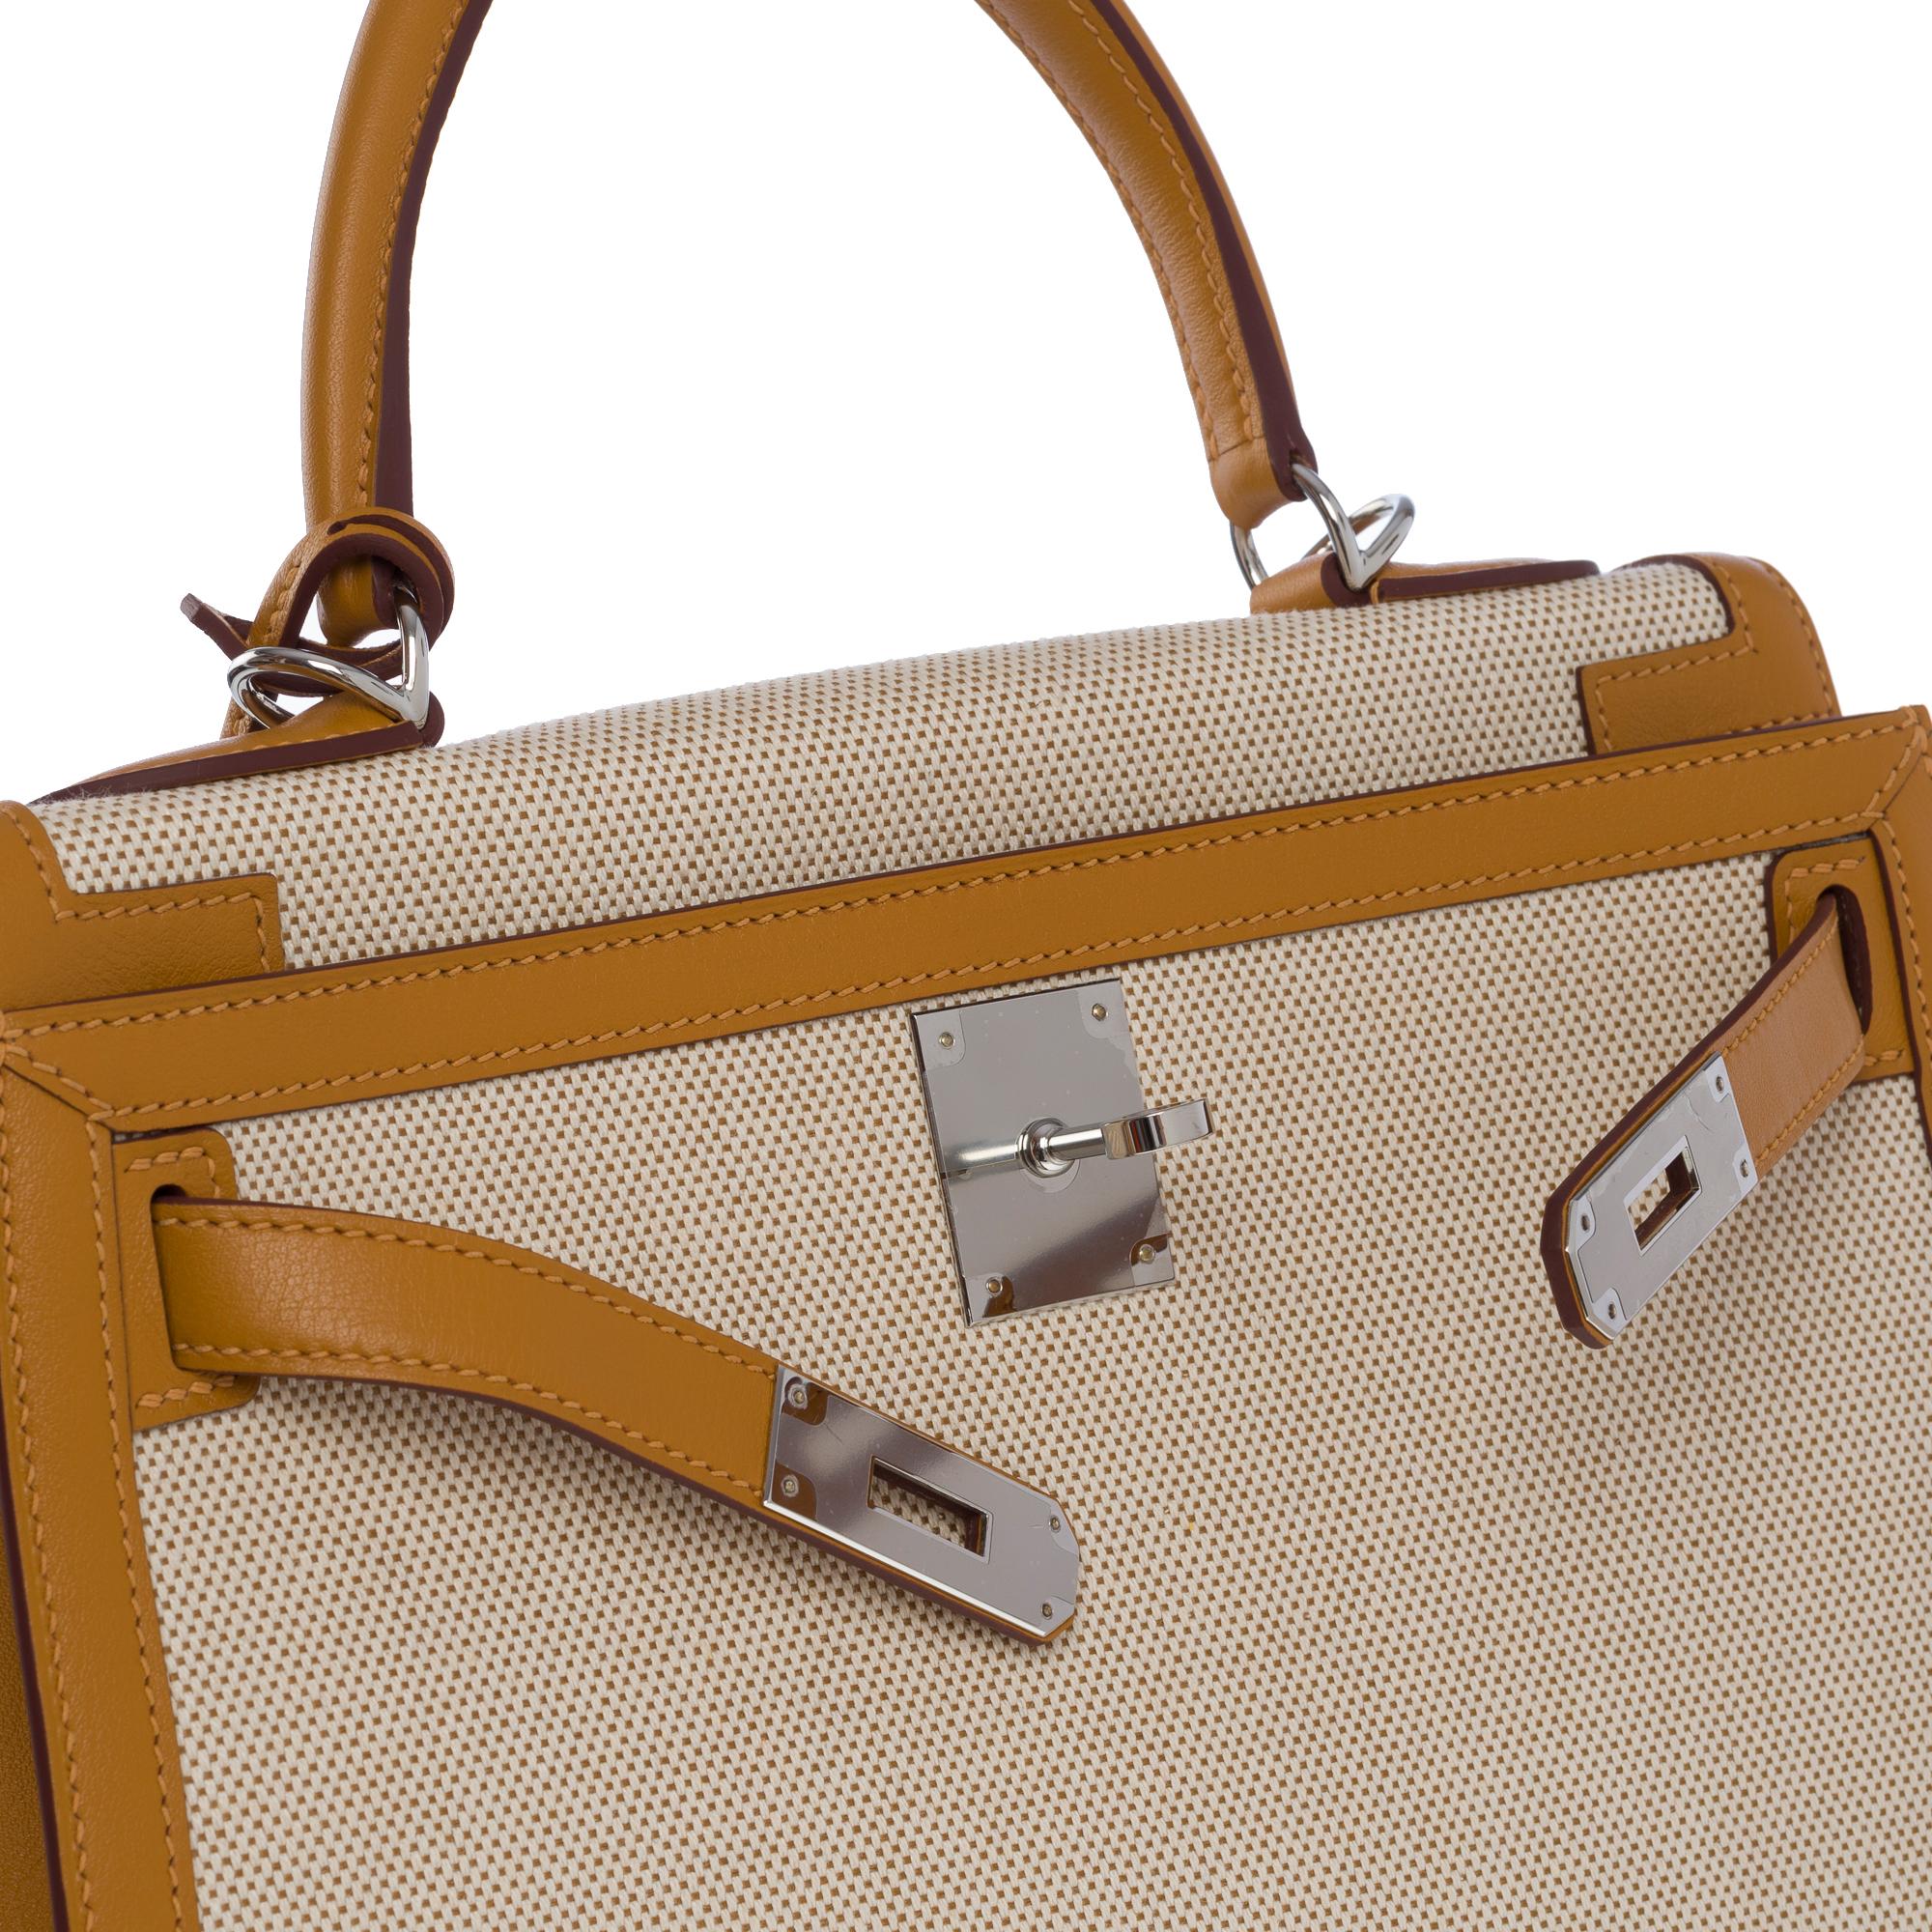 New Hermès Kelly 28 sellier handbag strap in beige canvas and gold leather, SHW In New Condition For Sale In Paris, IDF